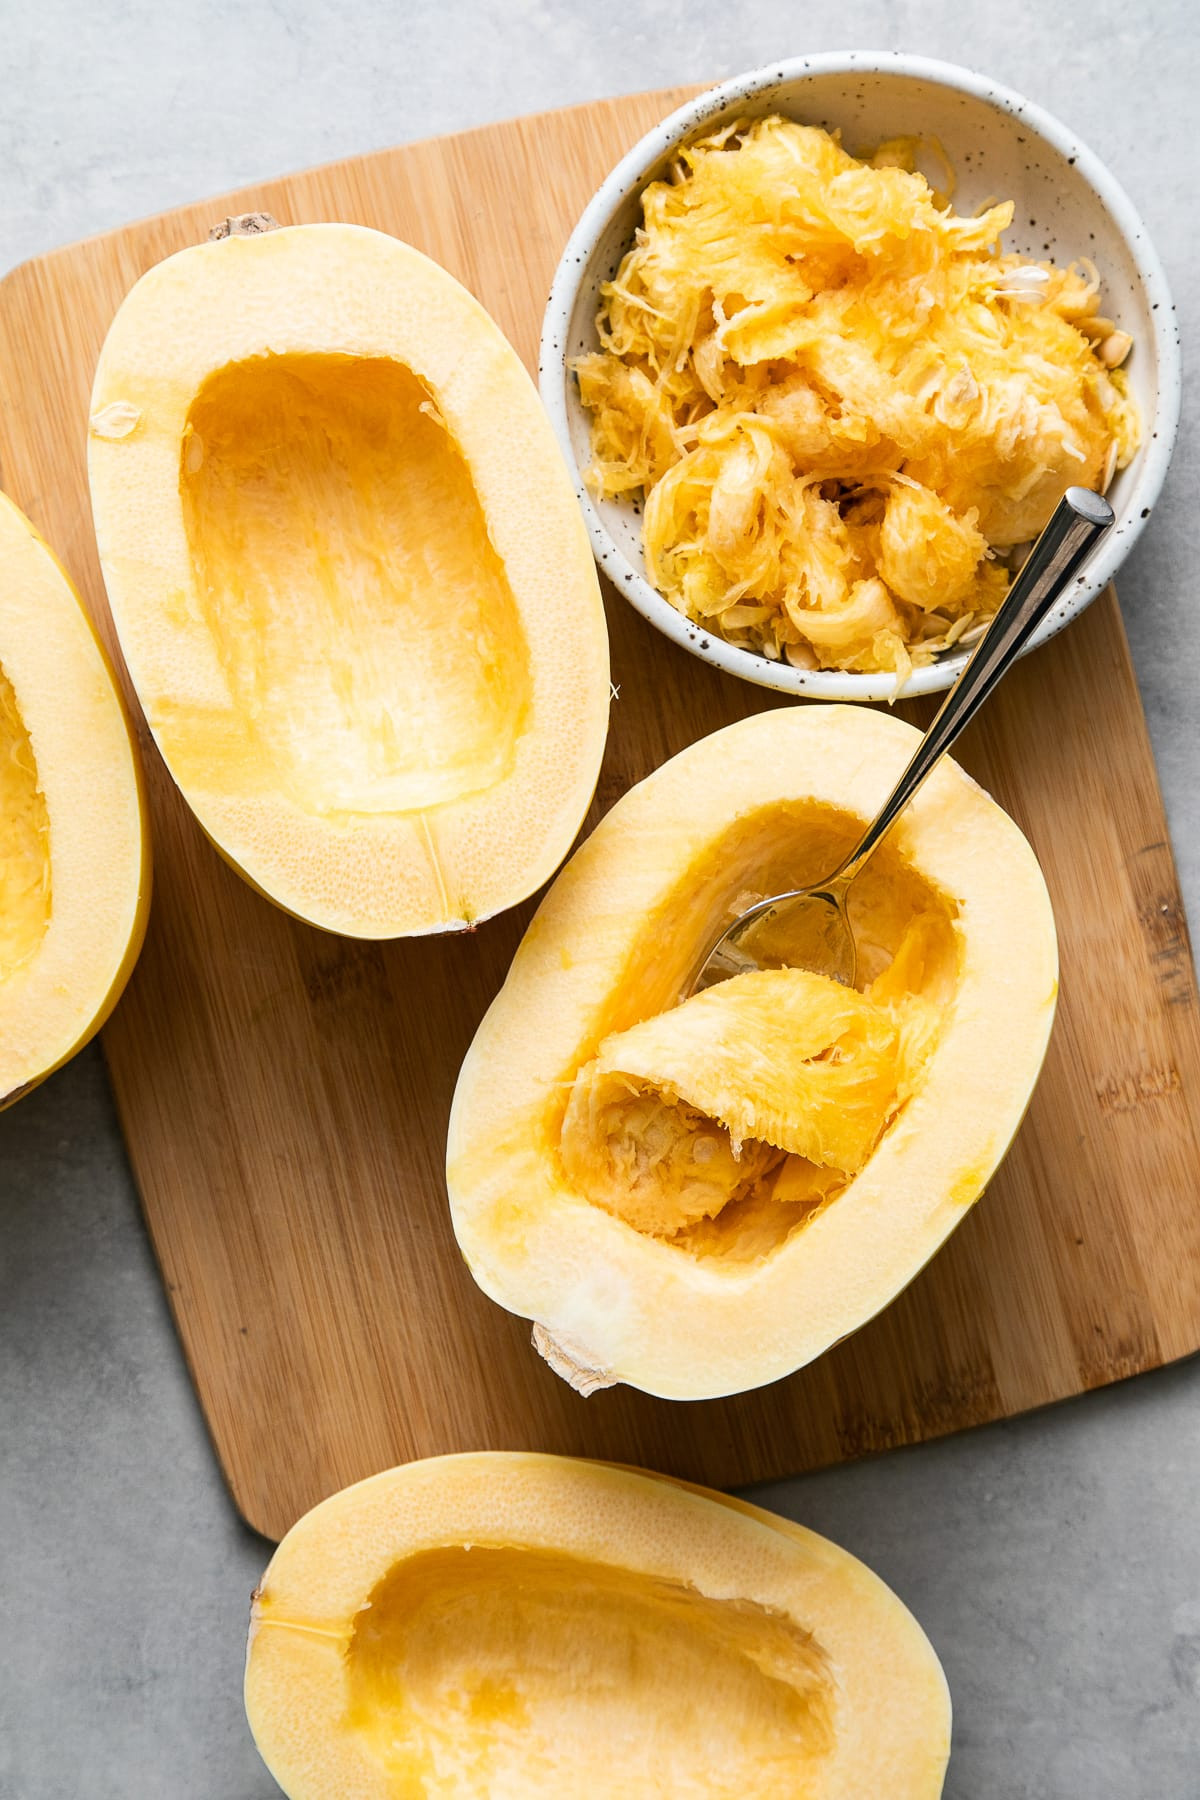 Cooking Spaghetti Squash In The Microwave
 How To Cook Spaghetti Squash In The Oven The Simple